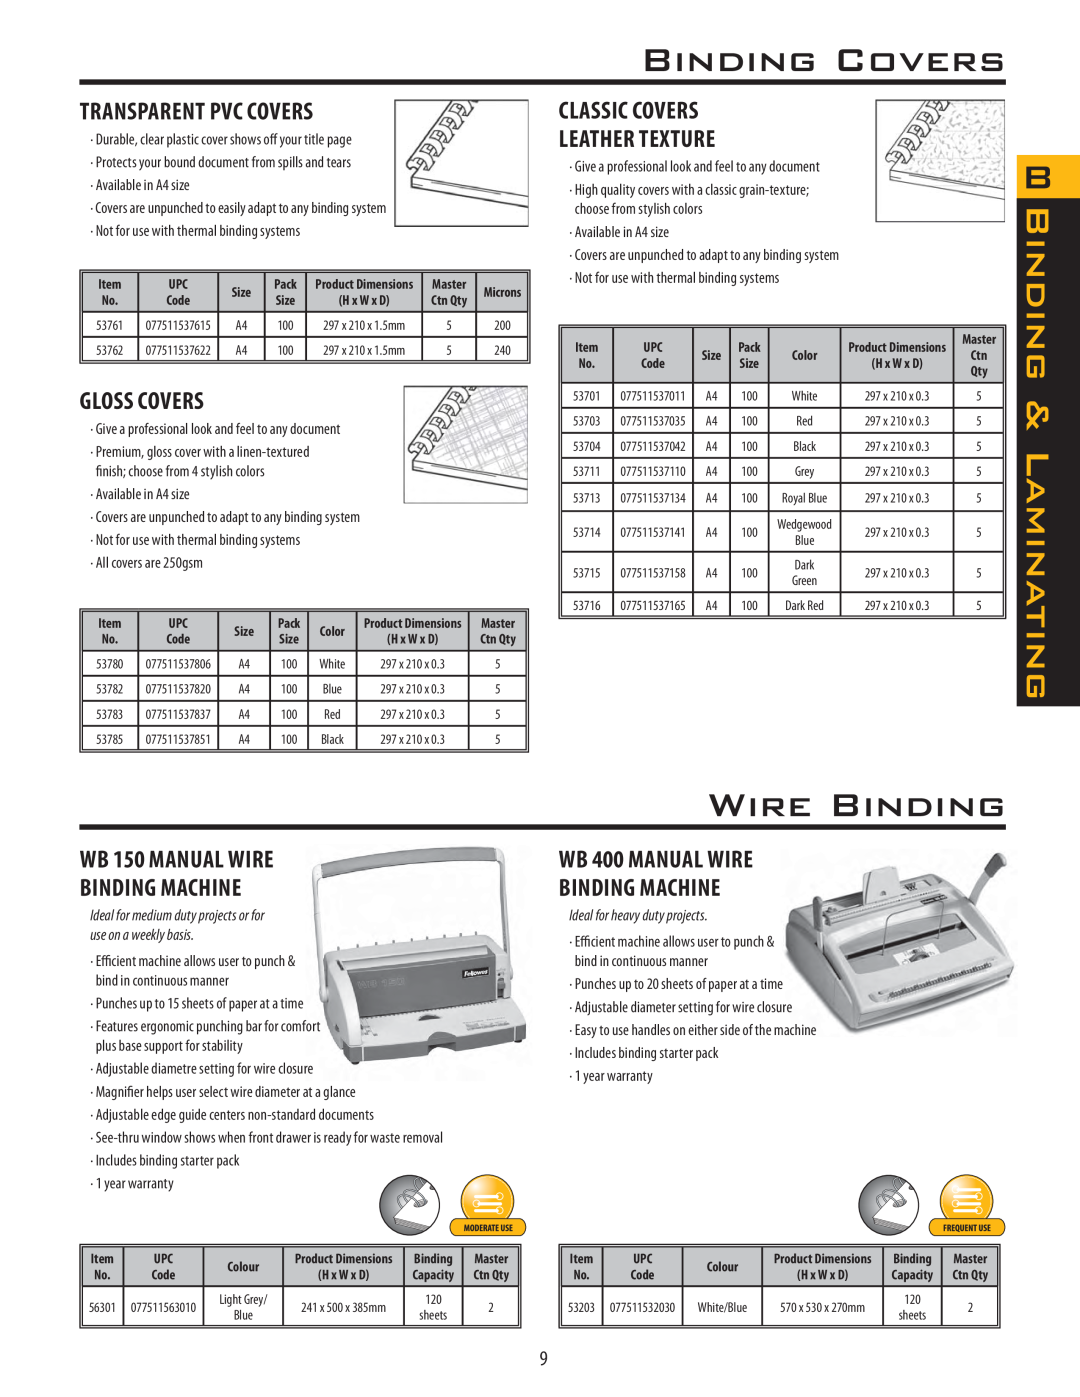 Fellowes PB250 Binding Covers, Wire Binding, Transparent Pvc Covers, Gloss Covers, WB 150 MANUAL WIRE BINDING MACHINE 